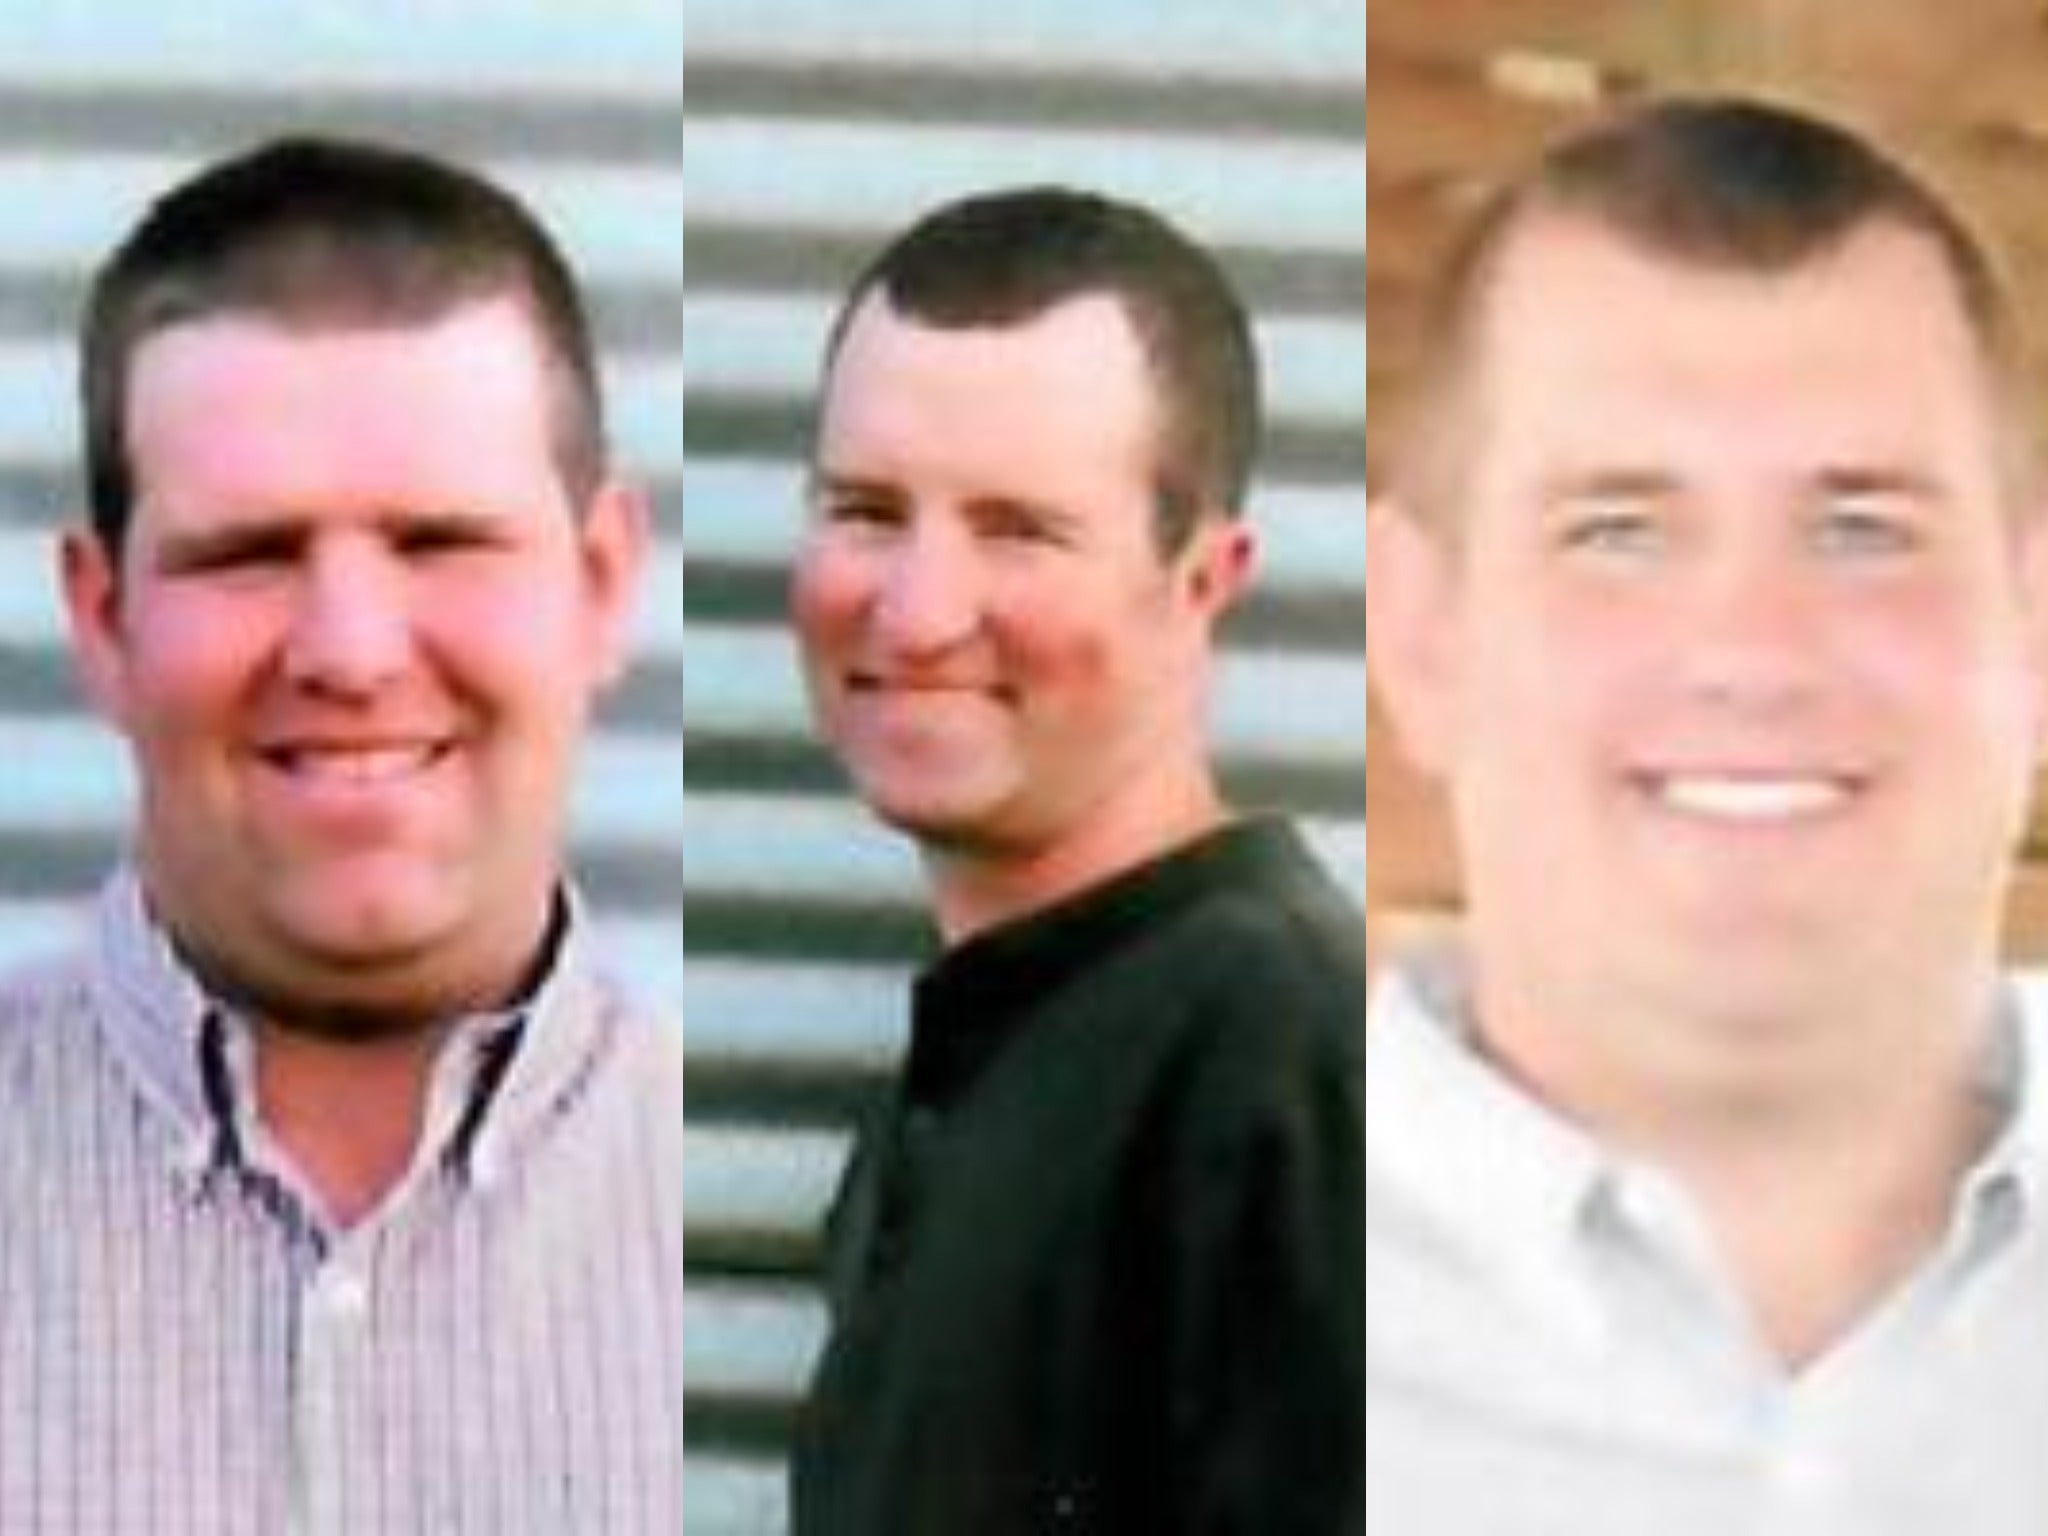 Gary Wuebker, 37; Brad Wuebker, 35, and Todd Wuebker, 31, died in manure pit at family farm.